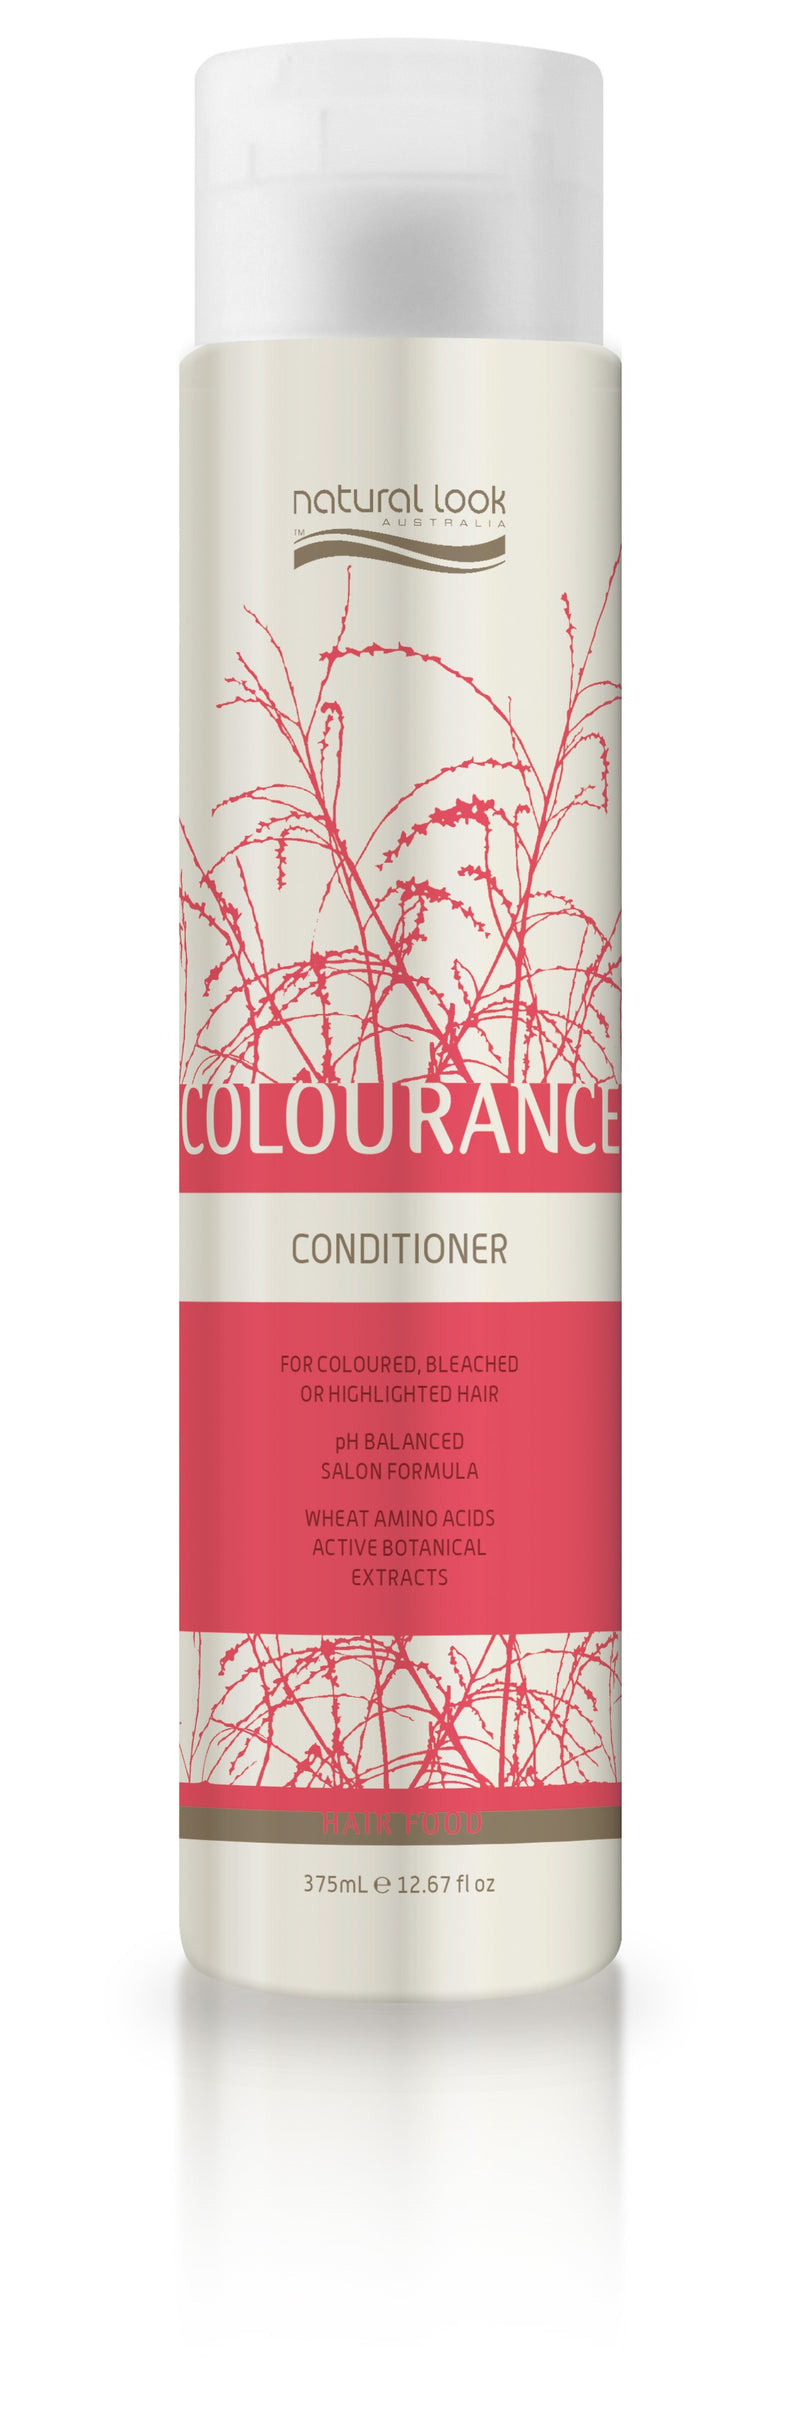 Natural Look Colourance Shine Enhancing Conditioner 375ml